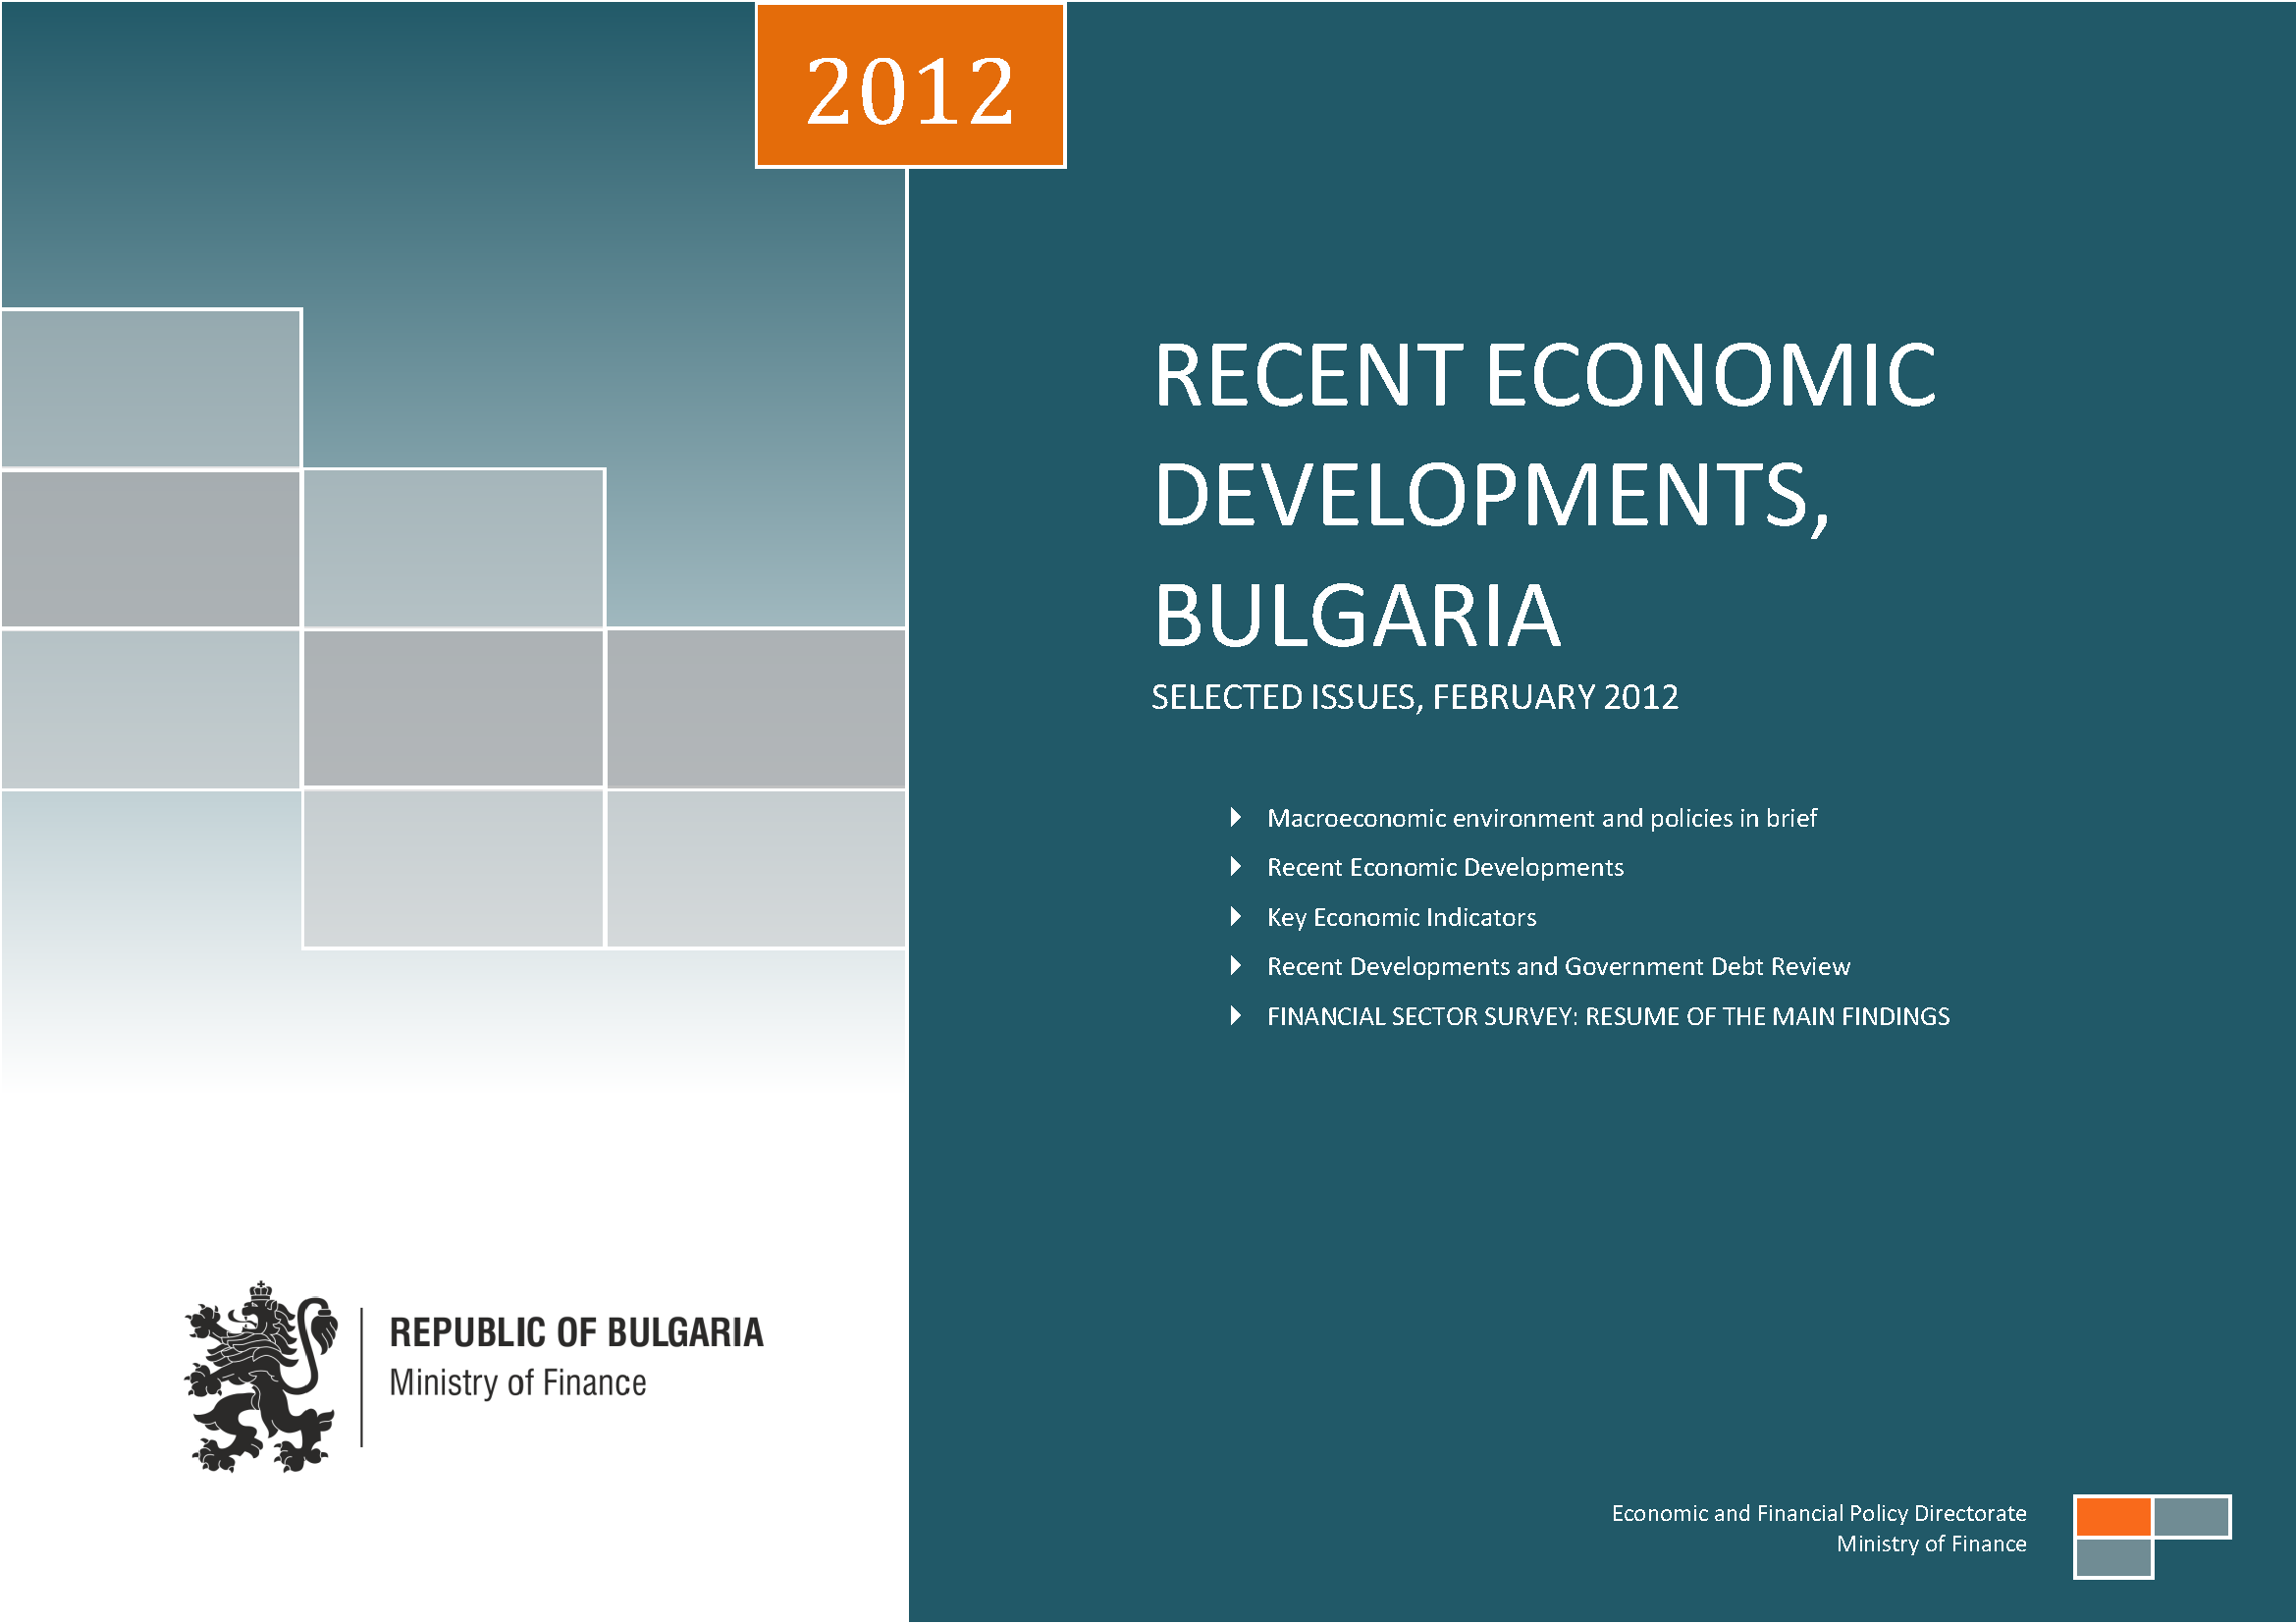 THE FEBRUARY ISSUE OF THE MONTHLY REPORT ON THE BULGARIAN ECONOMY HAS BEEN RELEASED